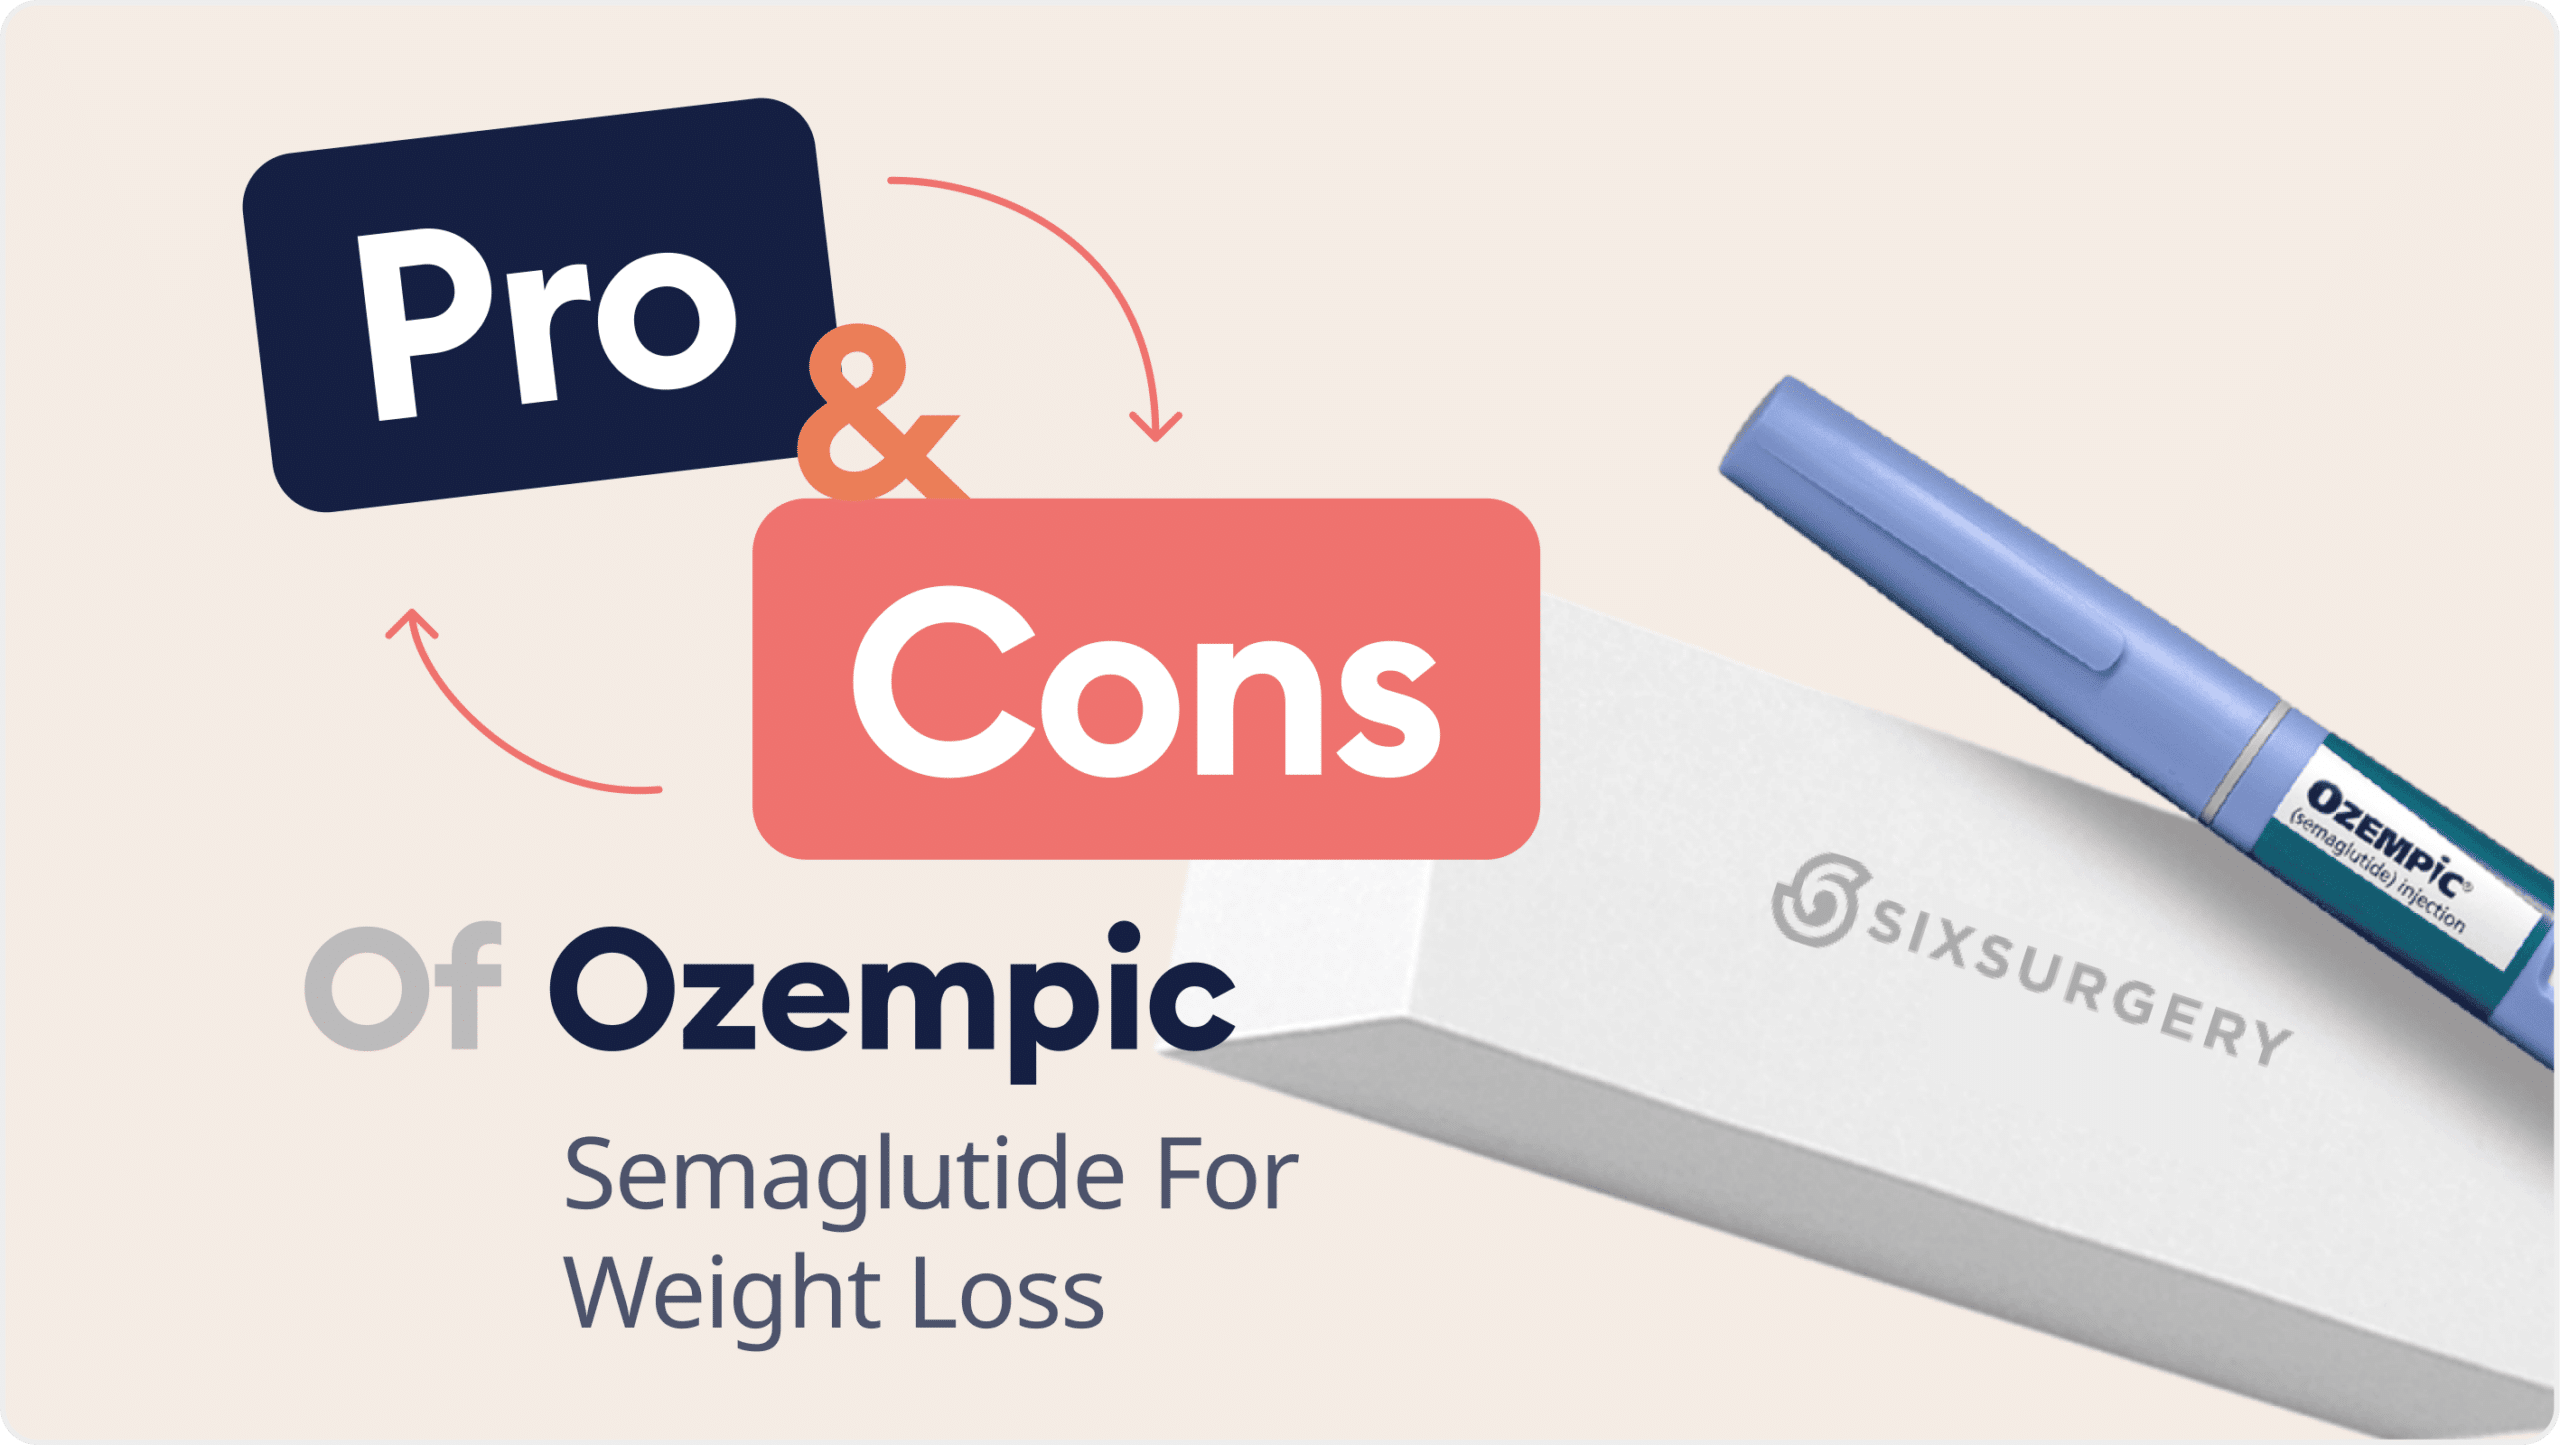 Pros and Cons of Ozempic: Semaglutide Weight Loss Drug